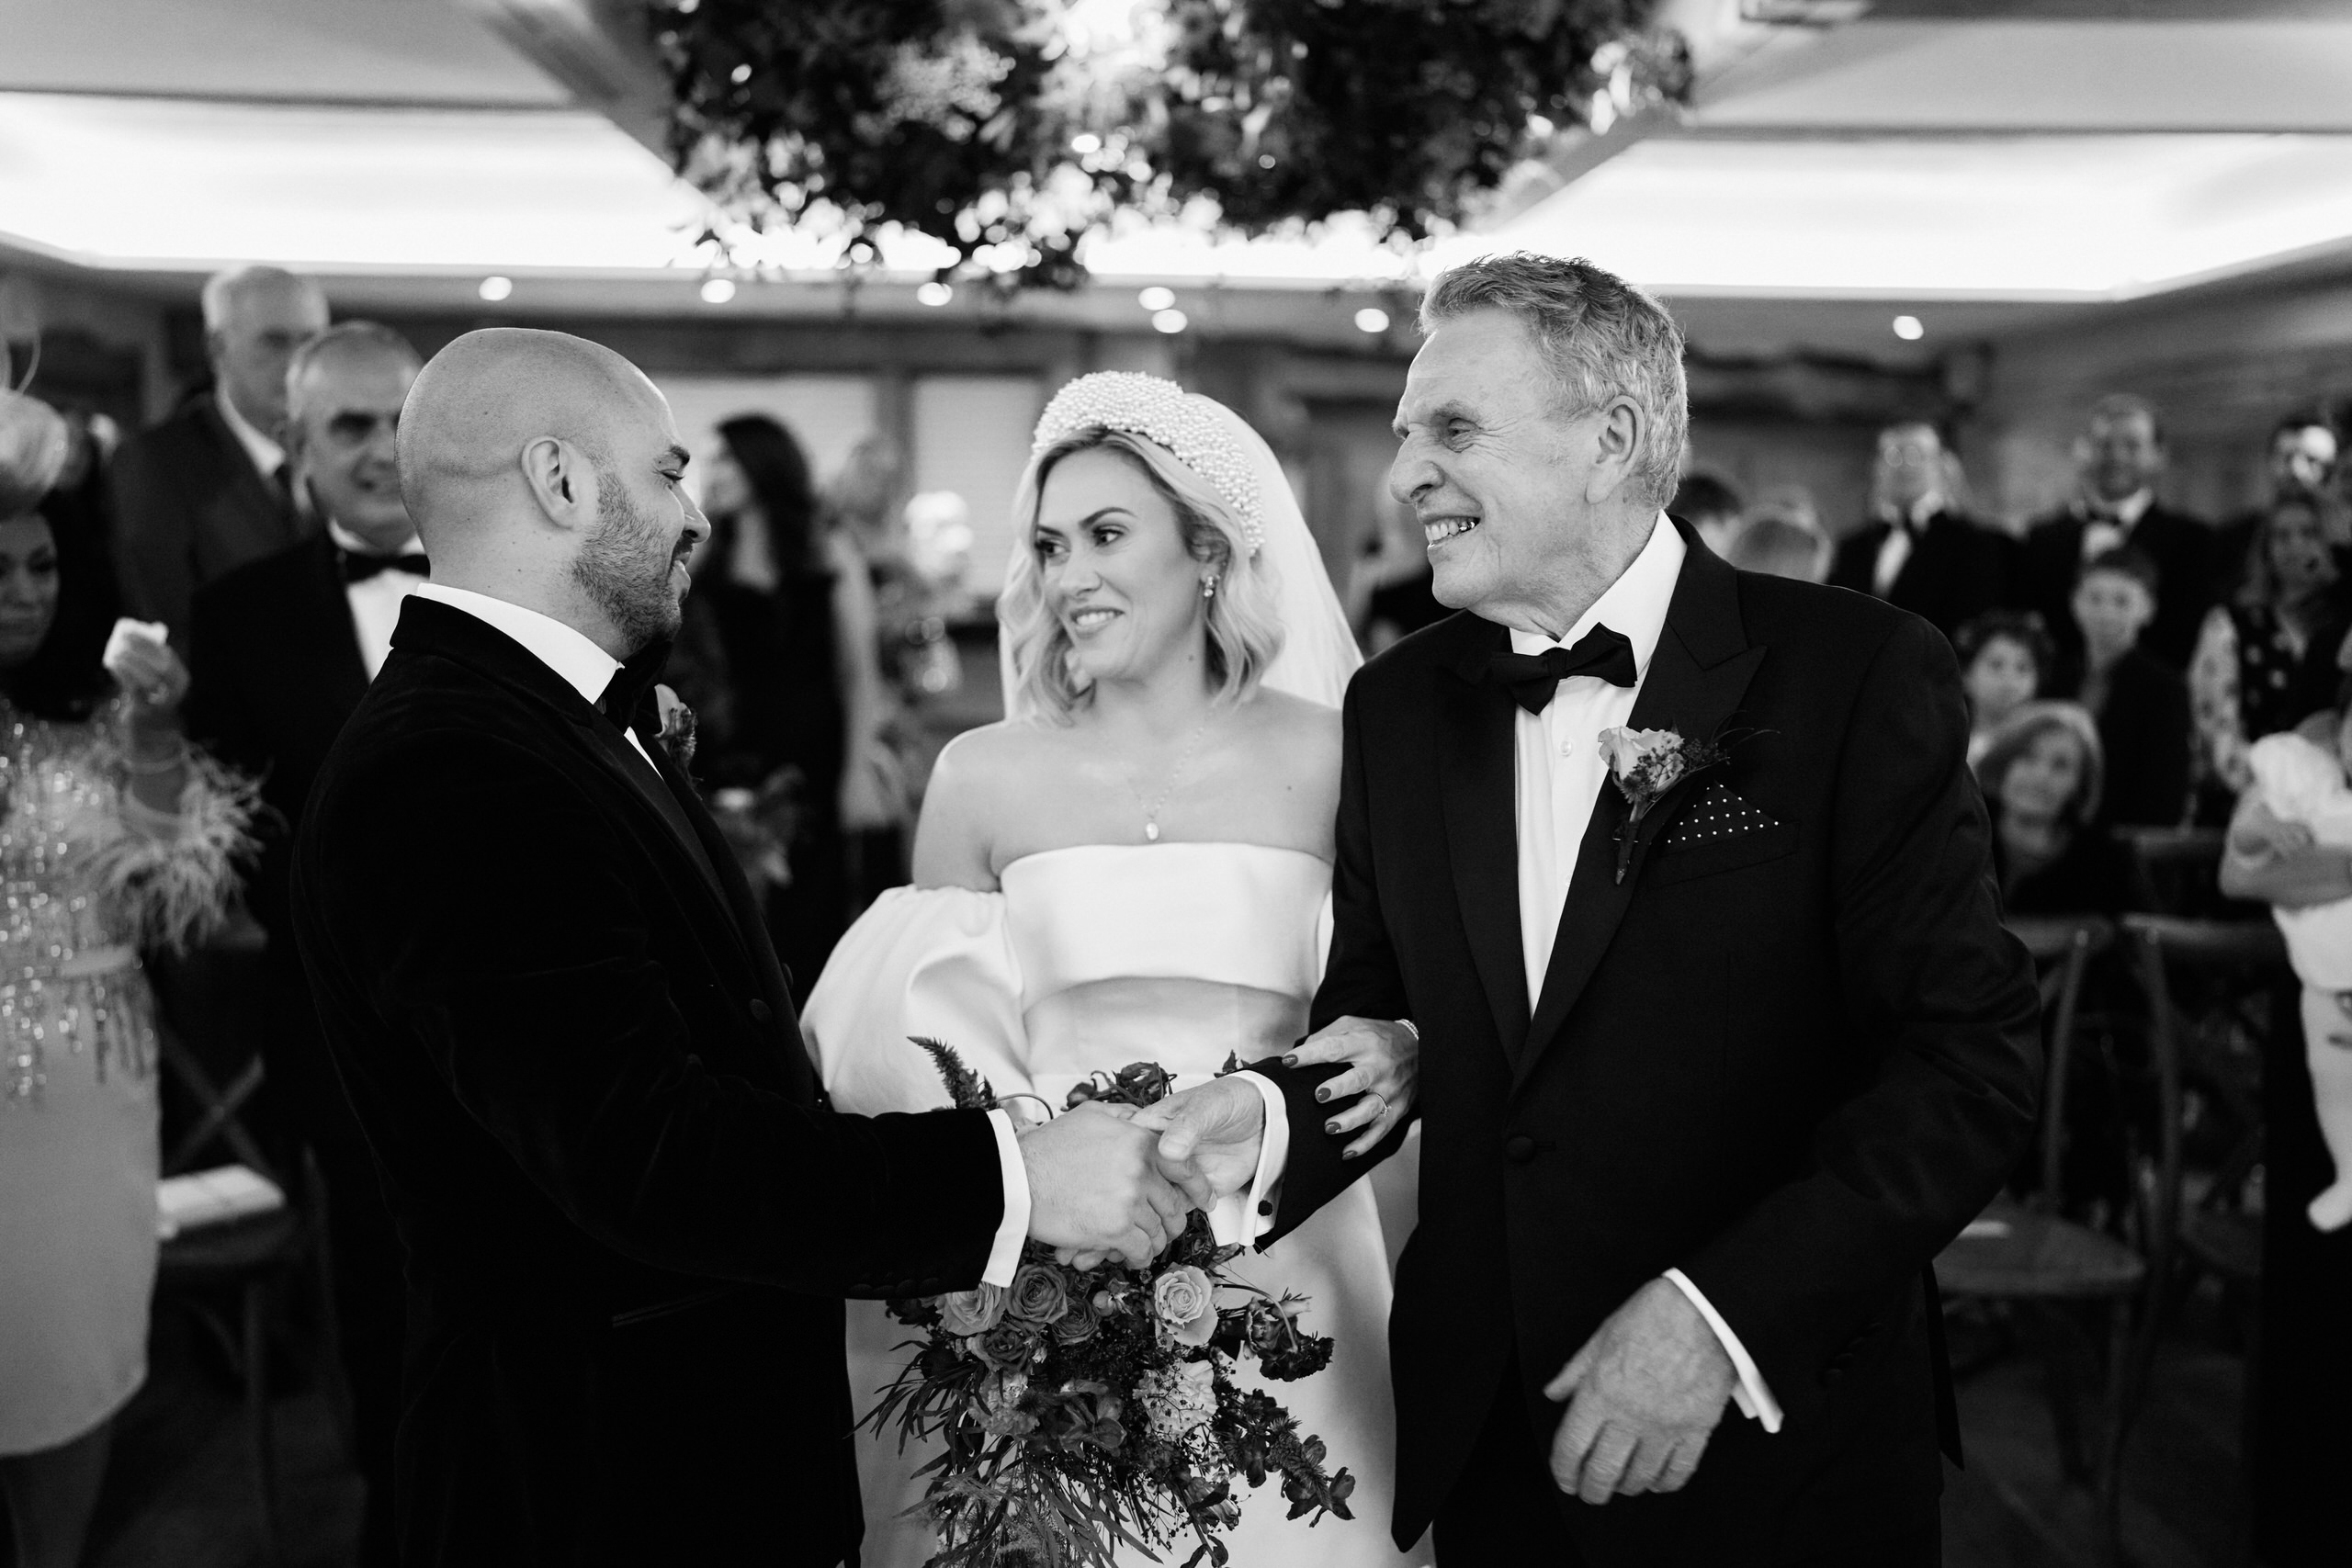 A black and white picture of a bride and groom going down the aisle.